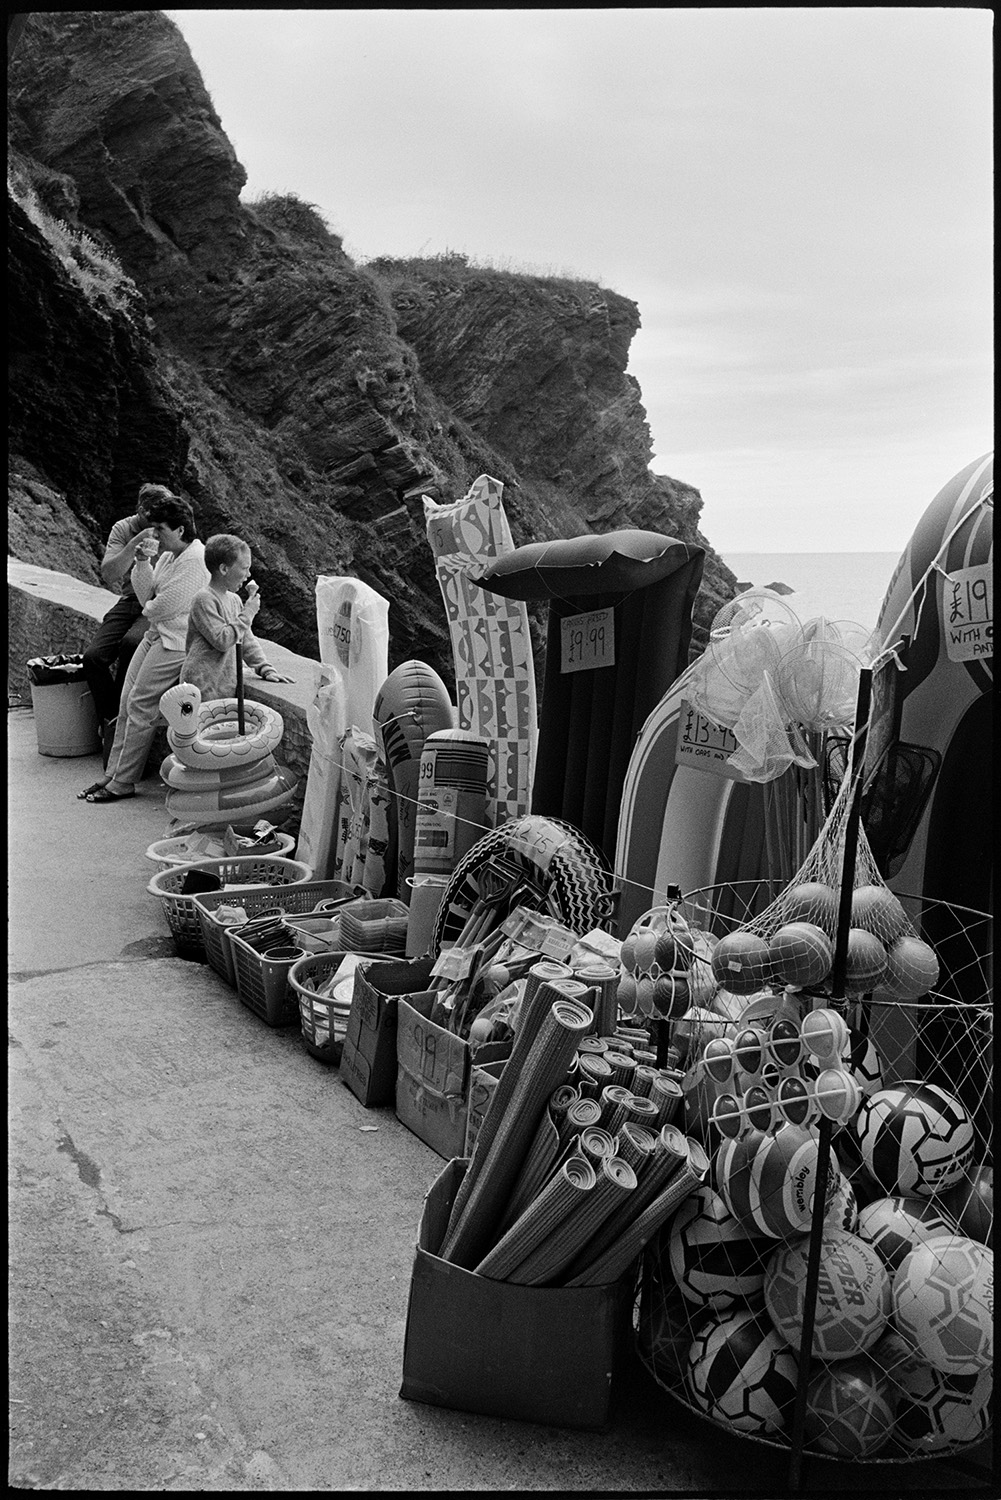 Seaside goods on display. 
[Beach goods, including footballs, rubber rings, inflatable dinghys and beach mats, on display by the sea wall in Ilfracombe. People eating ice creams and drinking tea can be seen in the background by cliffs.]